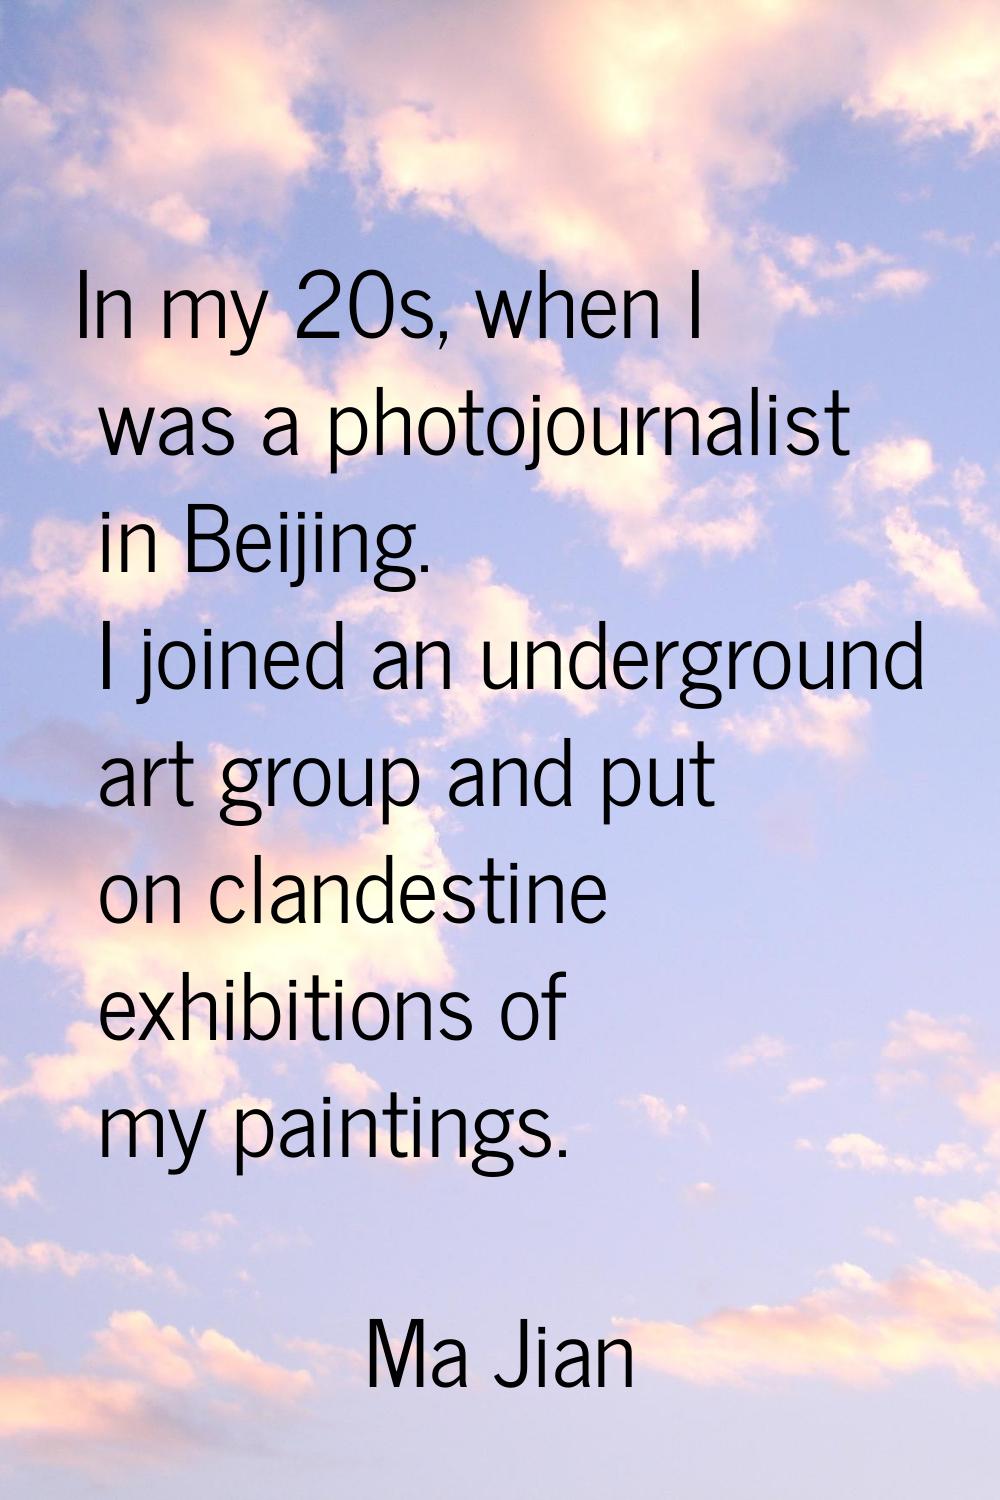 In my 20s, when I was a photojournalist in Beijing. I joined an underground art group and put on cl